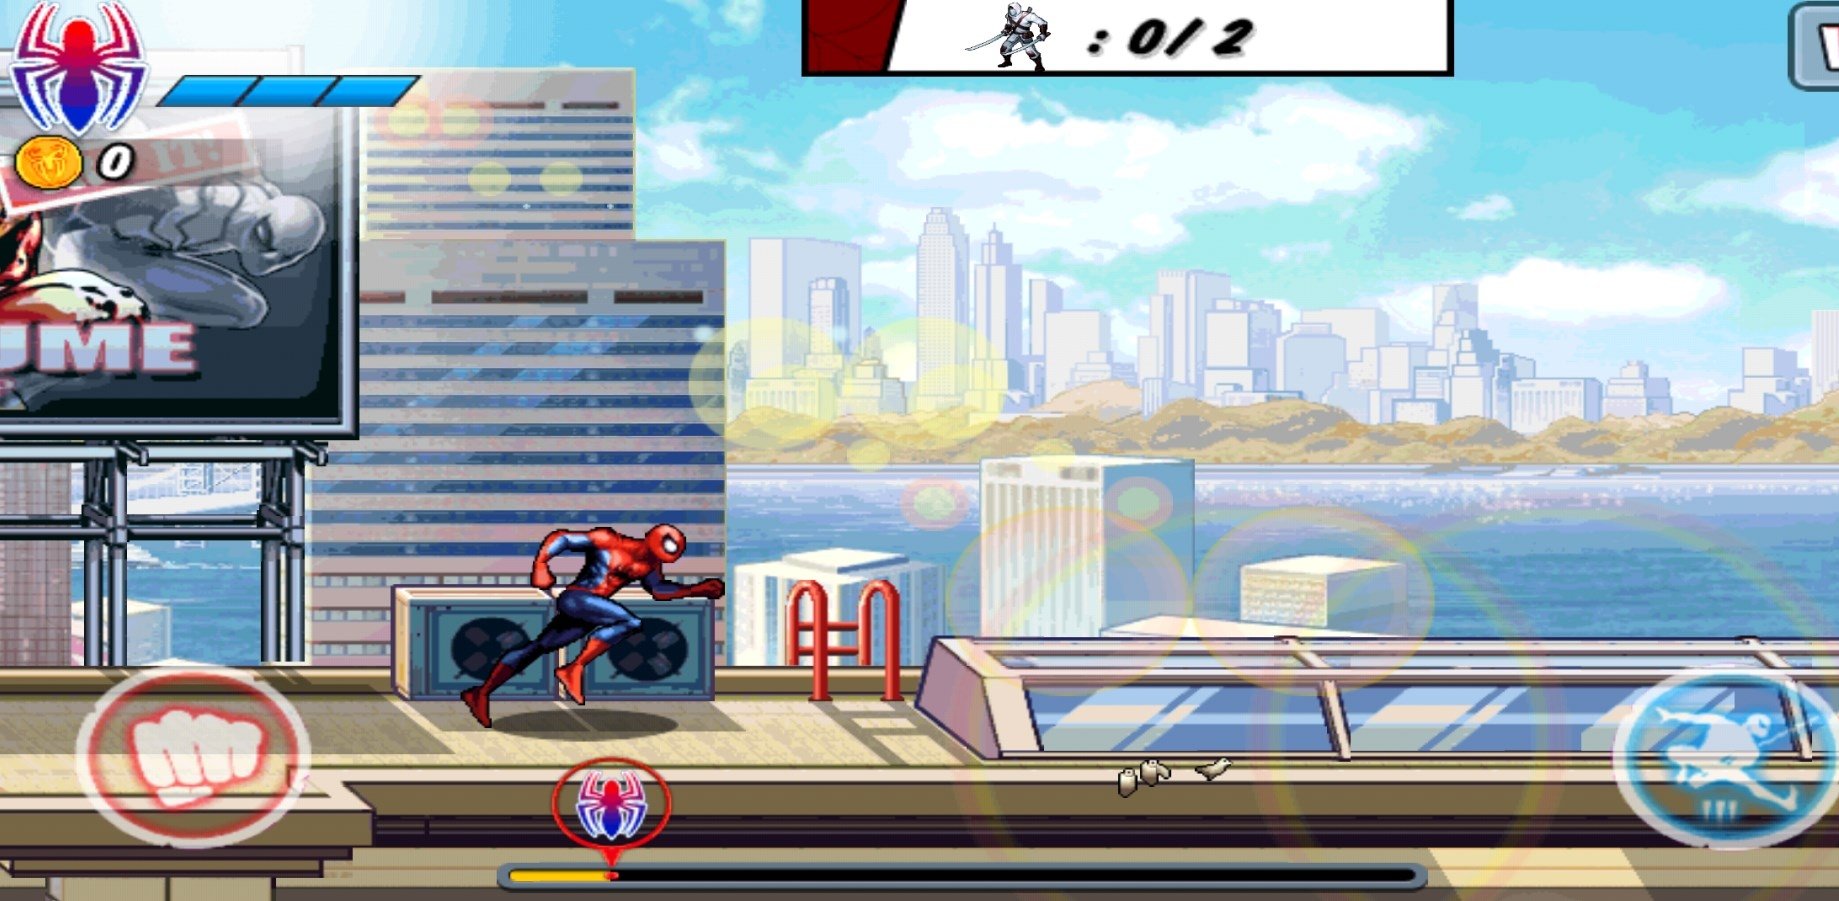 spiderman ultimate power game